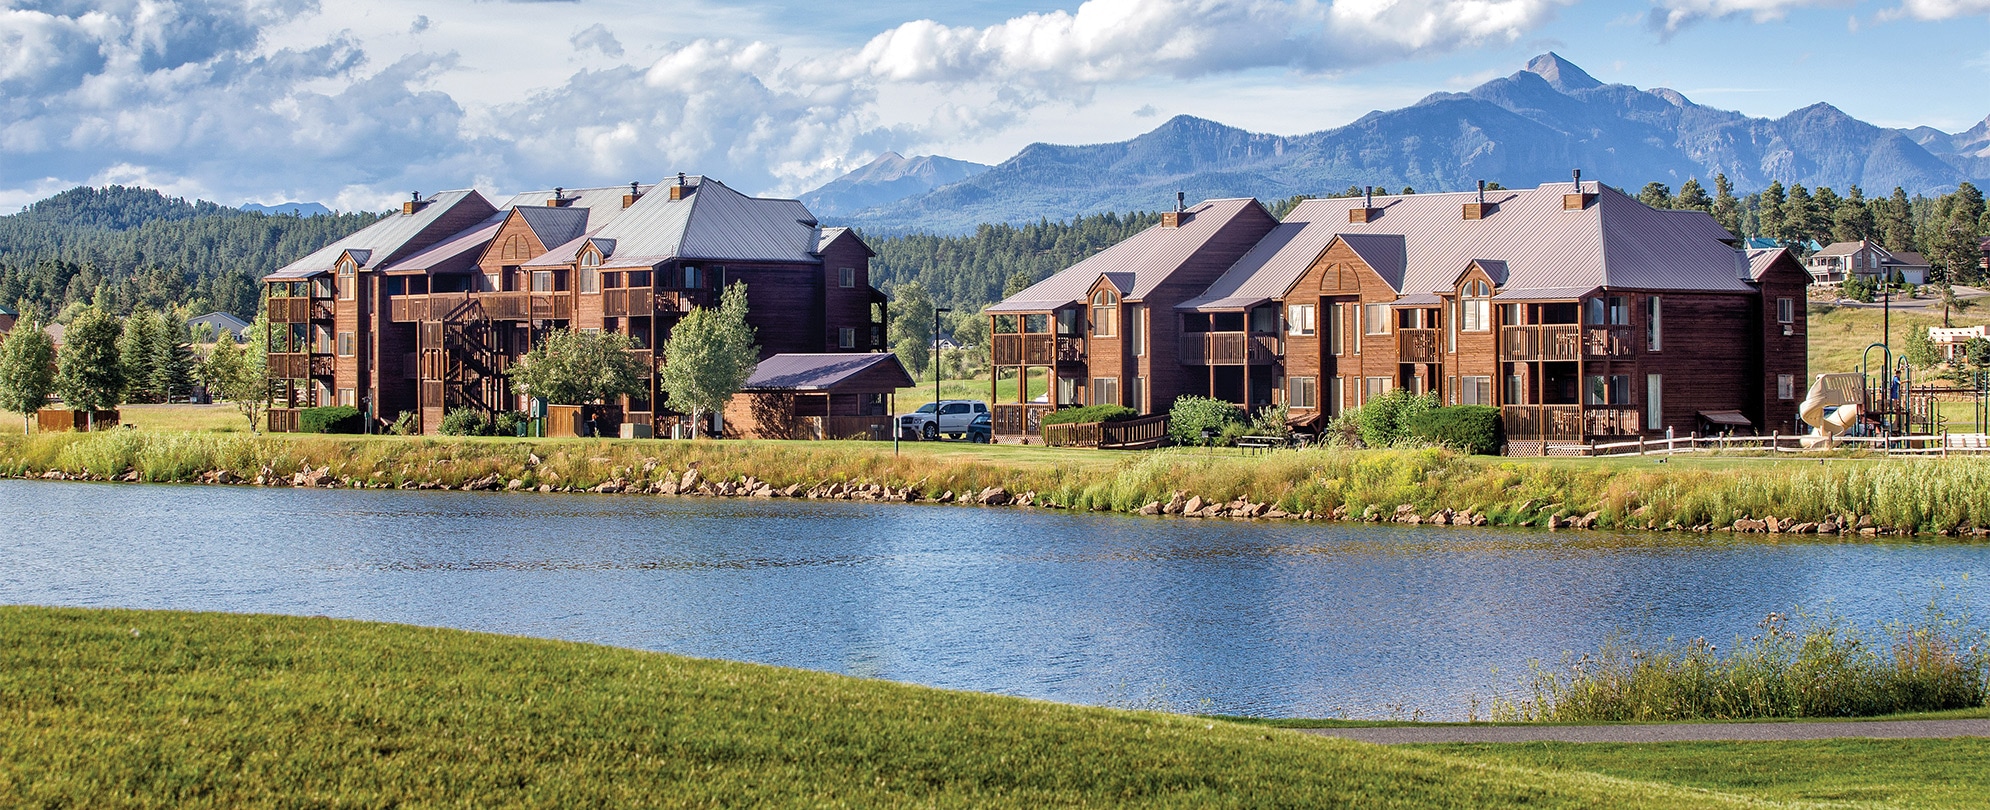 The exterior of WorldMark/Club Wyndham Pagosa, a Colorado timeshare resort surrounded by a lake and mountains.